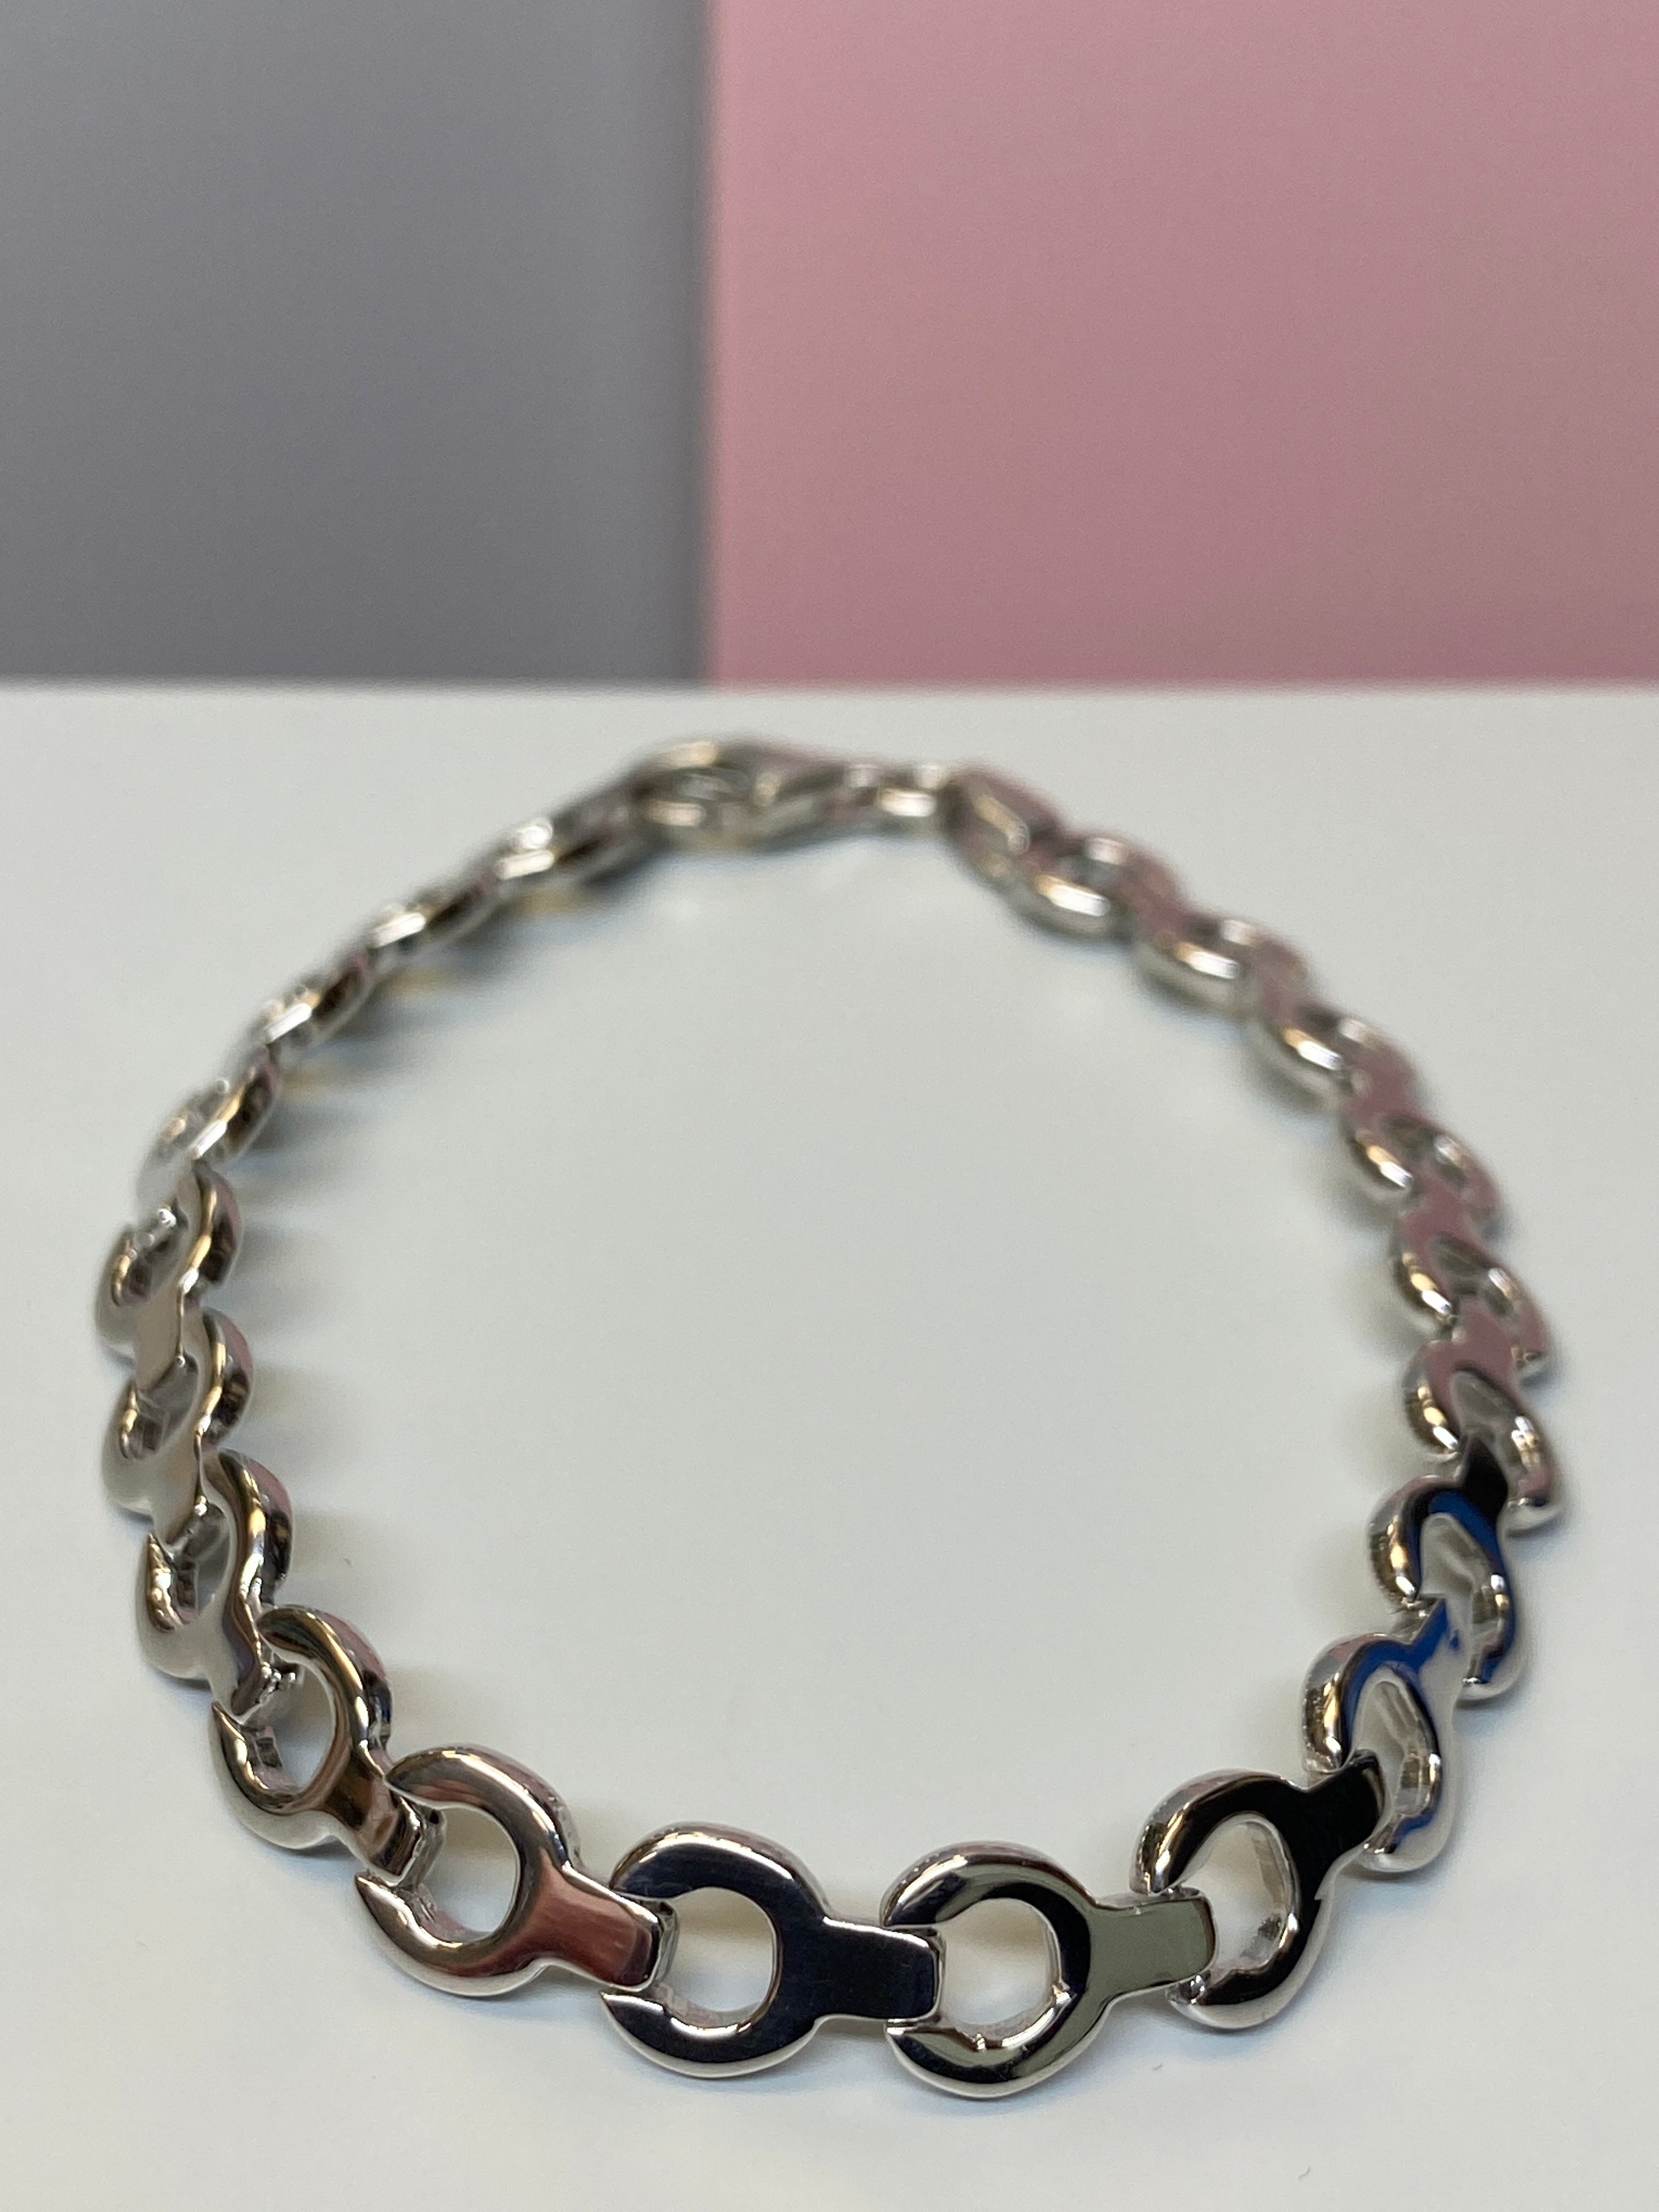 Silver Patterned Bracelet - Hallmark Jewellers Formby & The Jewellers Bench Widnes